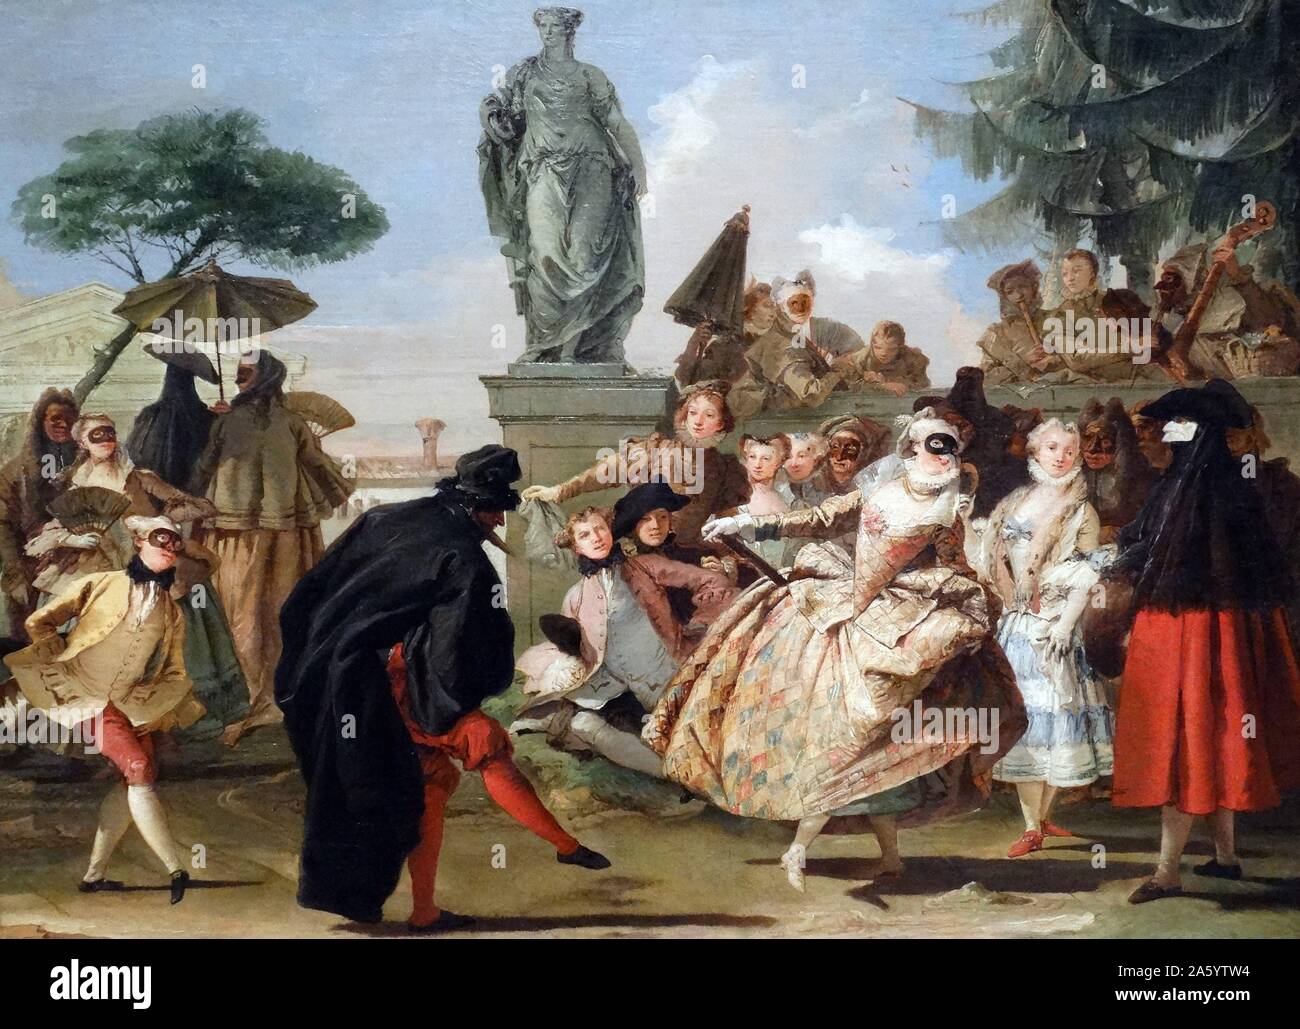 El minuet 1756 by Giovanni Domenico Tiepolo, 1727-1804. Oil on canvas. The minuet is inspired by the protagonists in the 'Commedia dell'arte' by Carlo Goldoni. Stock Photo